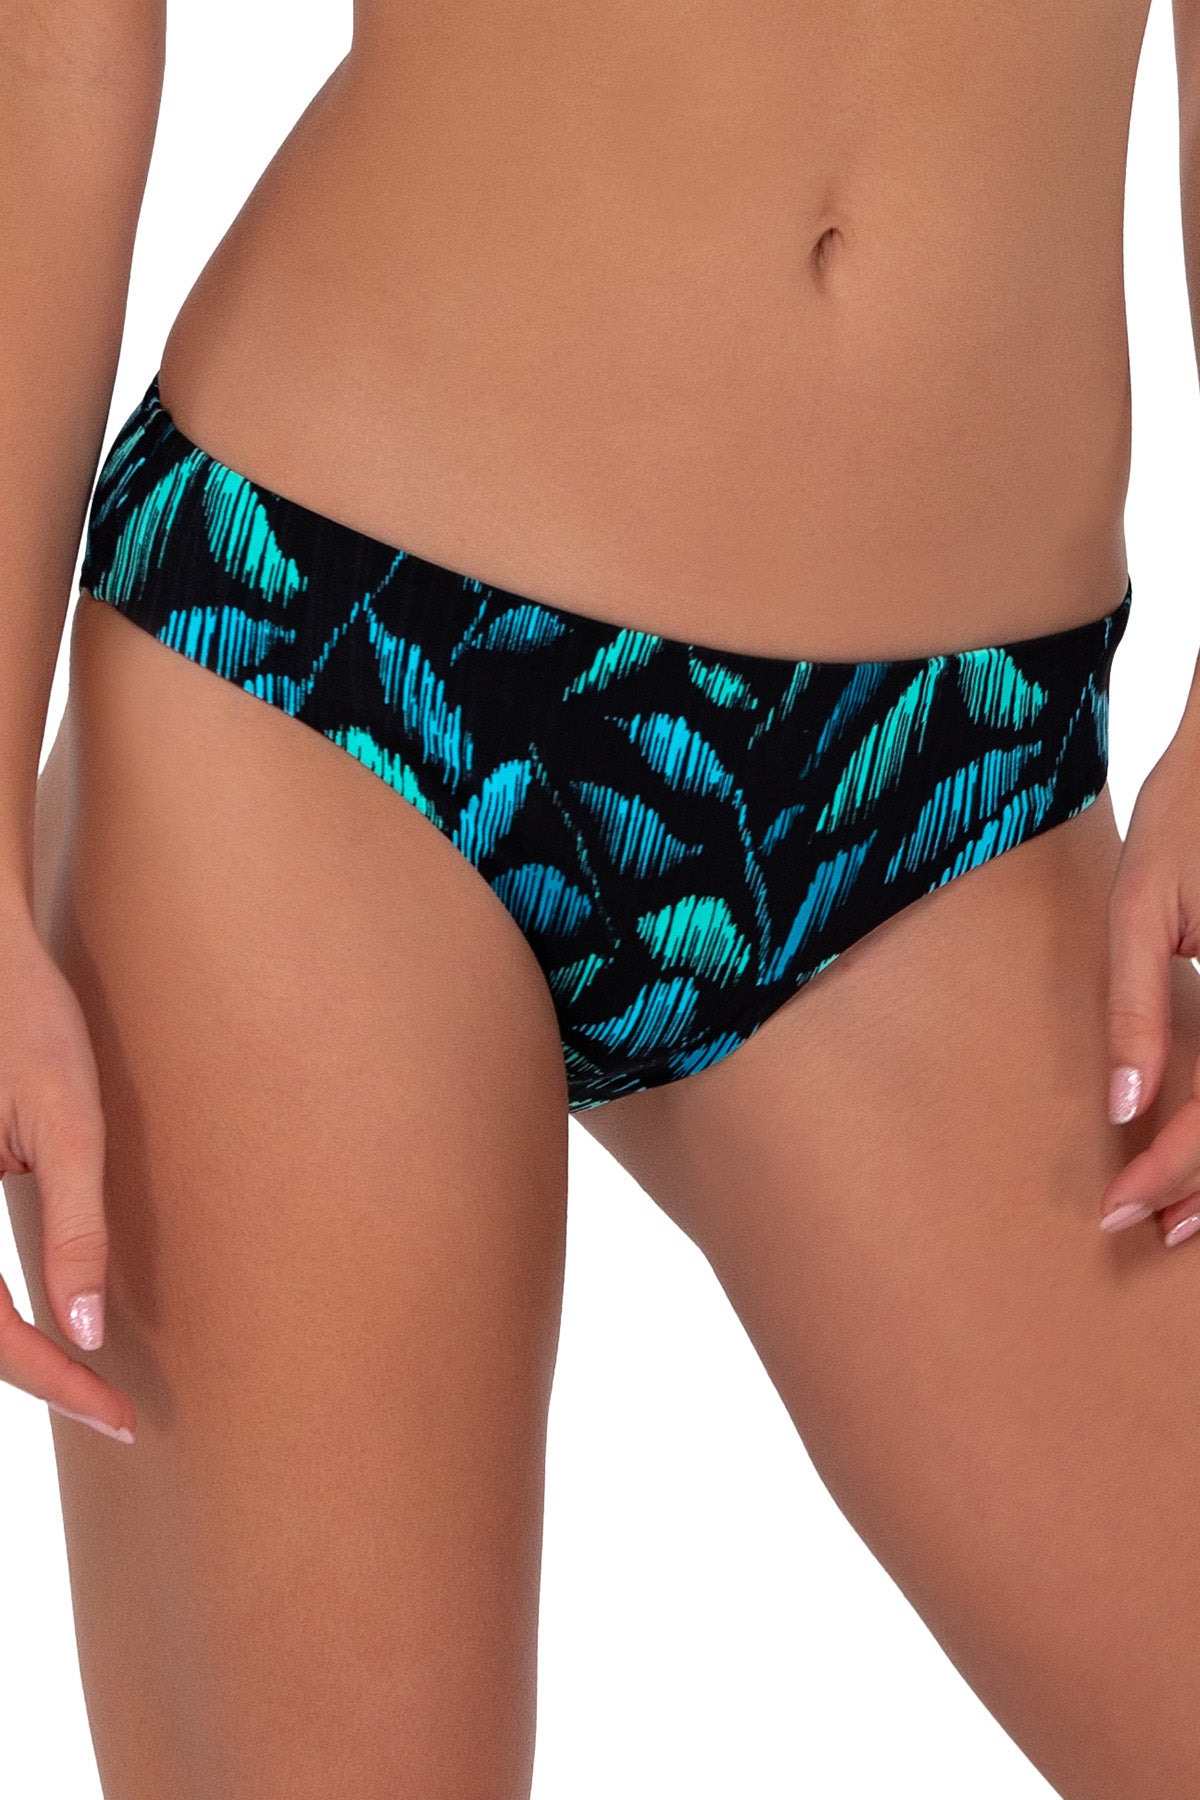 Side pose #1 of Gigi wearing Sunsets Cascade Seagrass Texture Collins Hipster Bottom